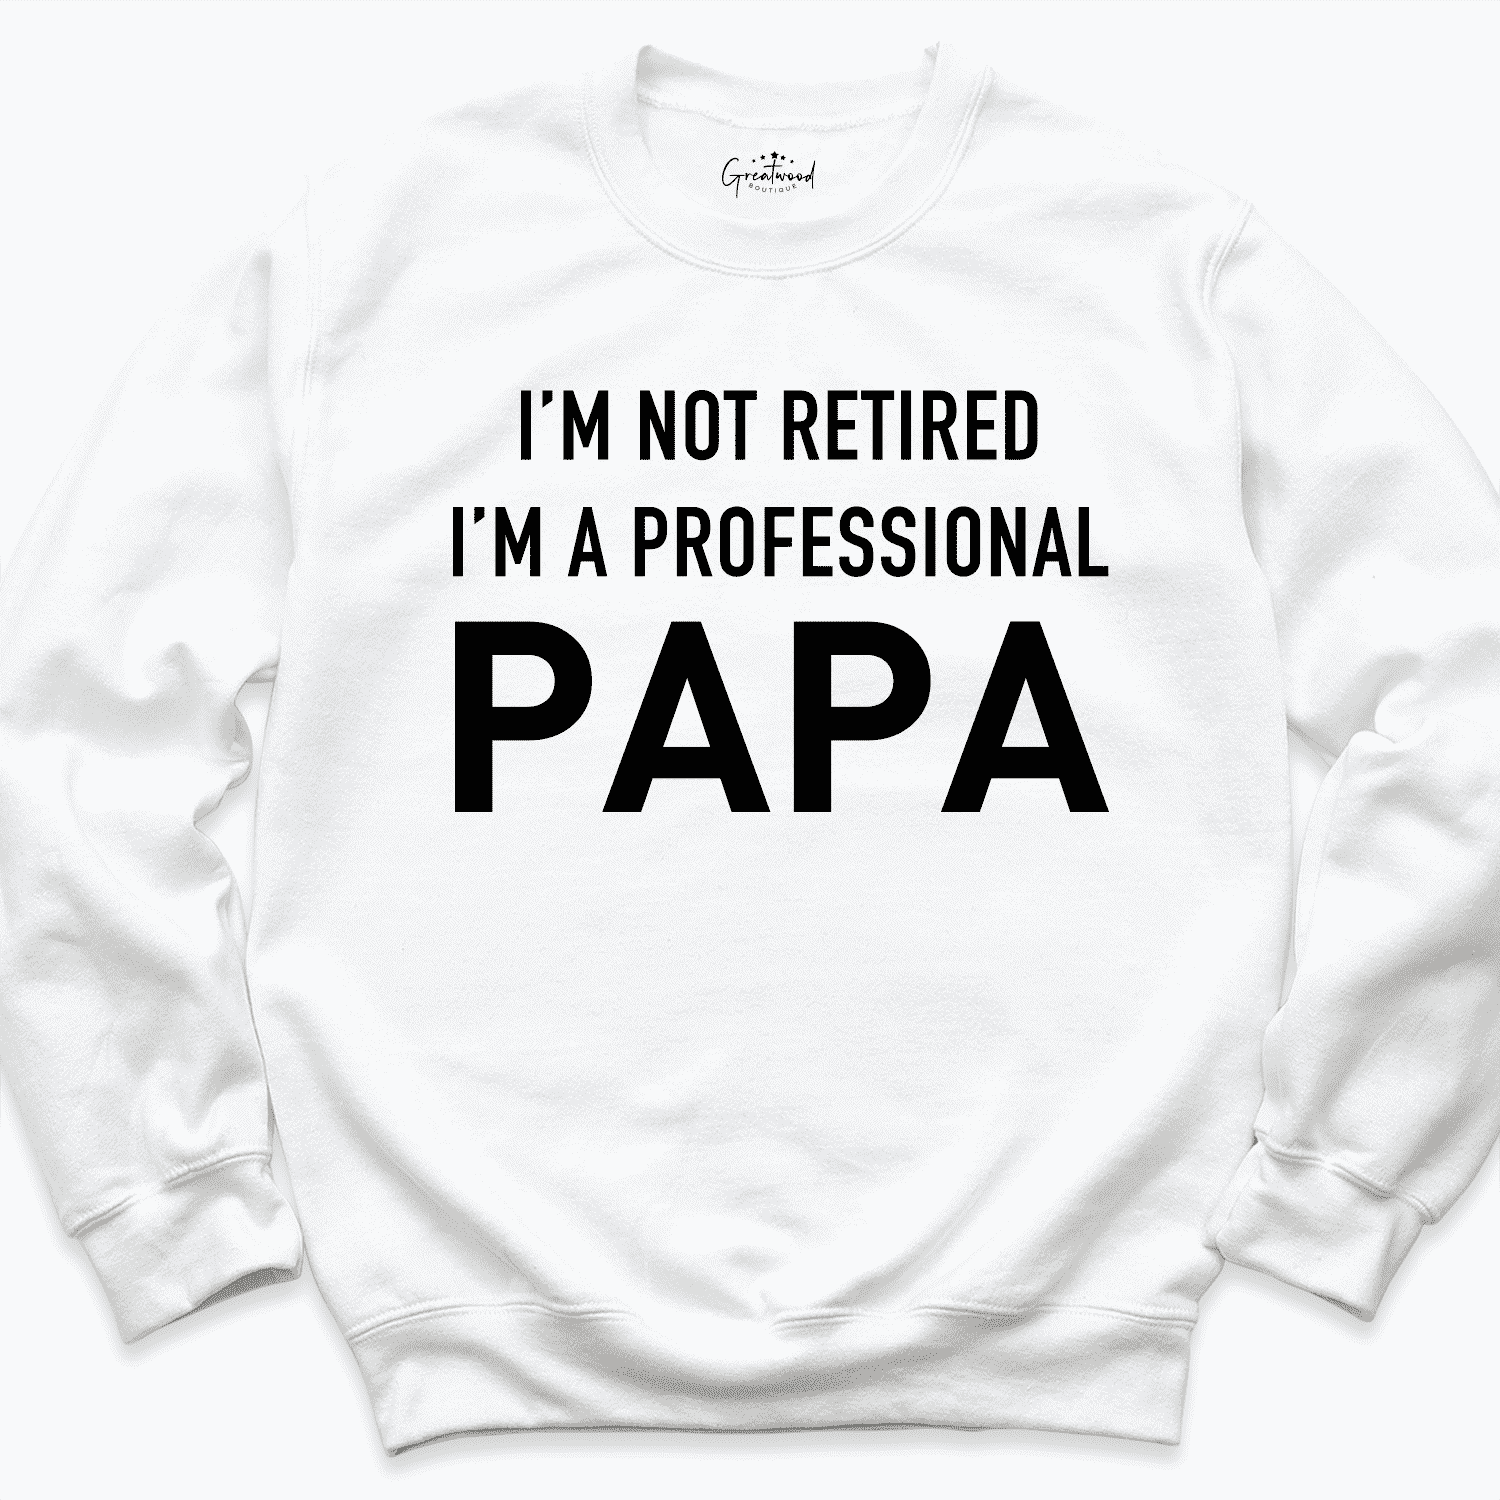 I'm Not Retired I'm a Professional Papa Shirt White - Greatwood Boutique